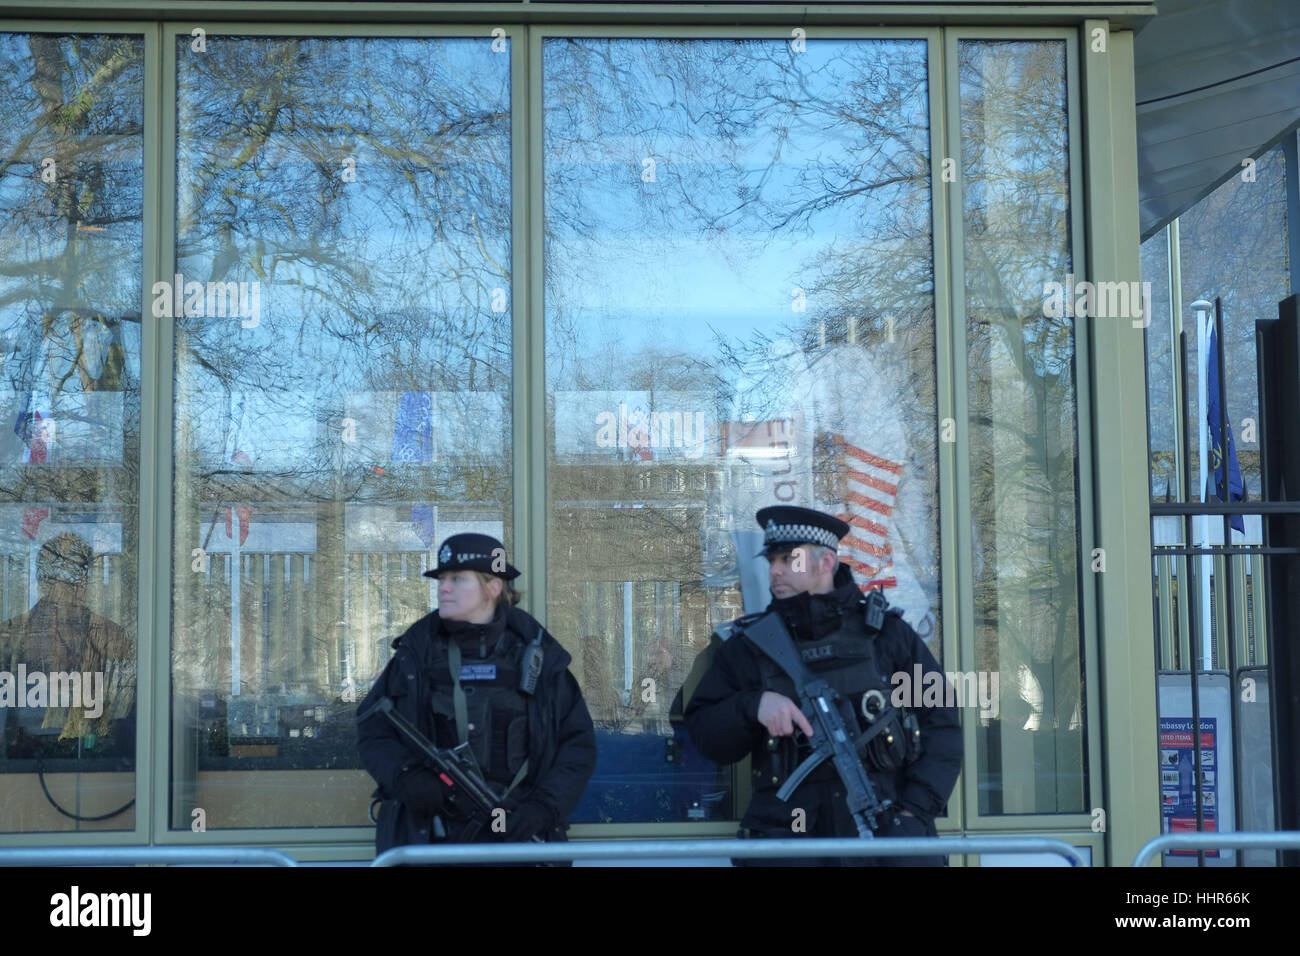 London, UK. 20th Jan, 2017. Security outside the U.S Embassy ahead of  President Elect Donald Trump's inauguration. Credit: claire doherty/Alamy Live News Stock Photo